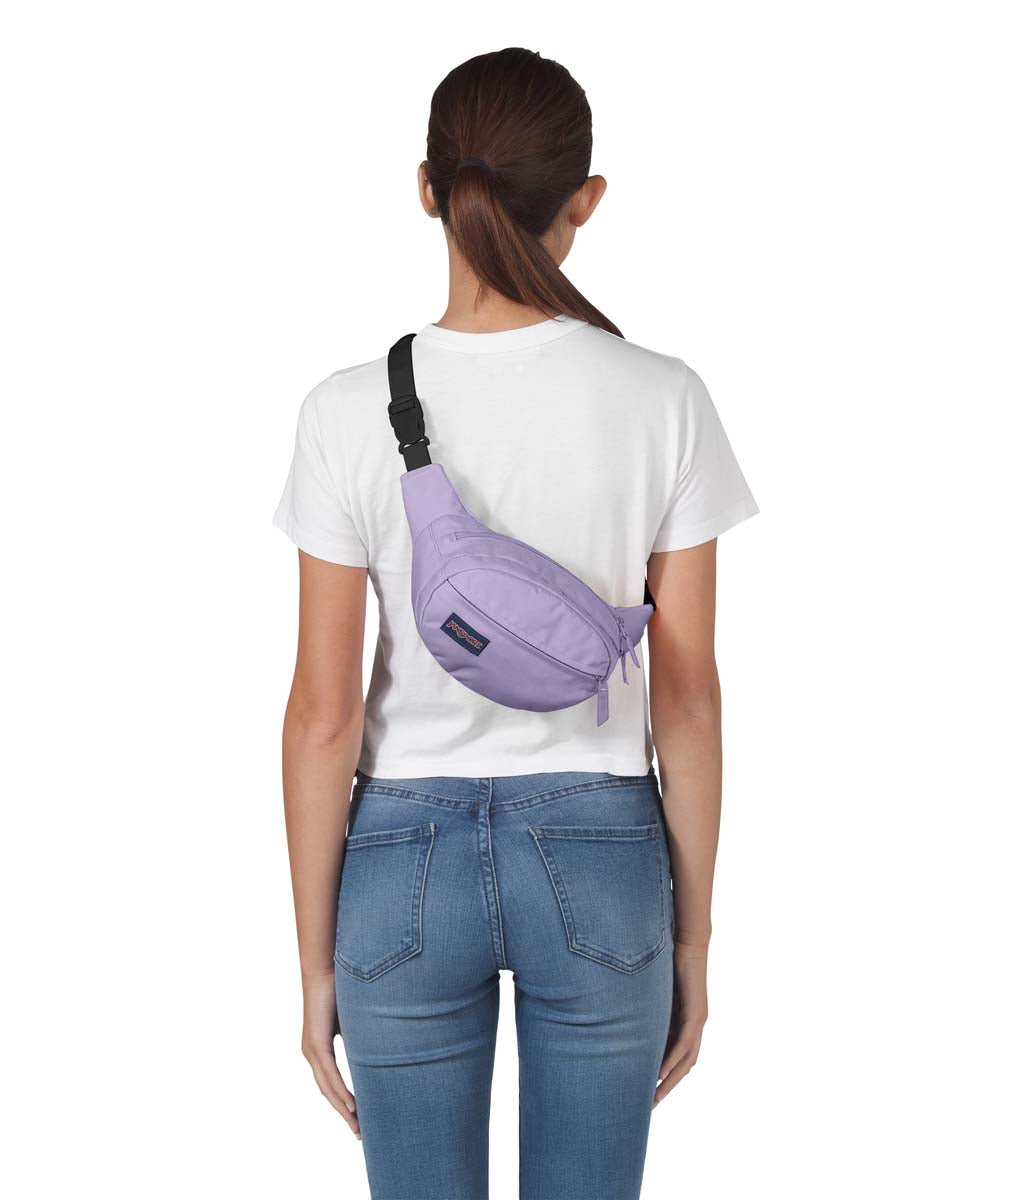 JanSport Fifth Ave Fanny Pack - Pastel Lilac